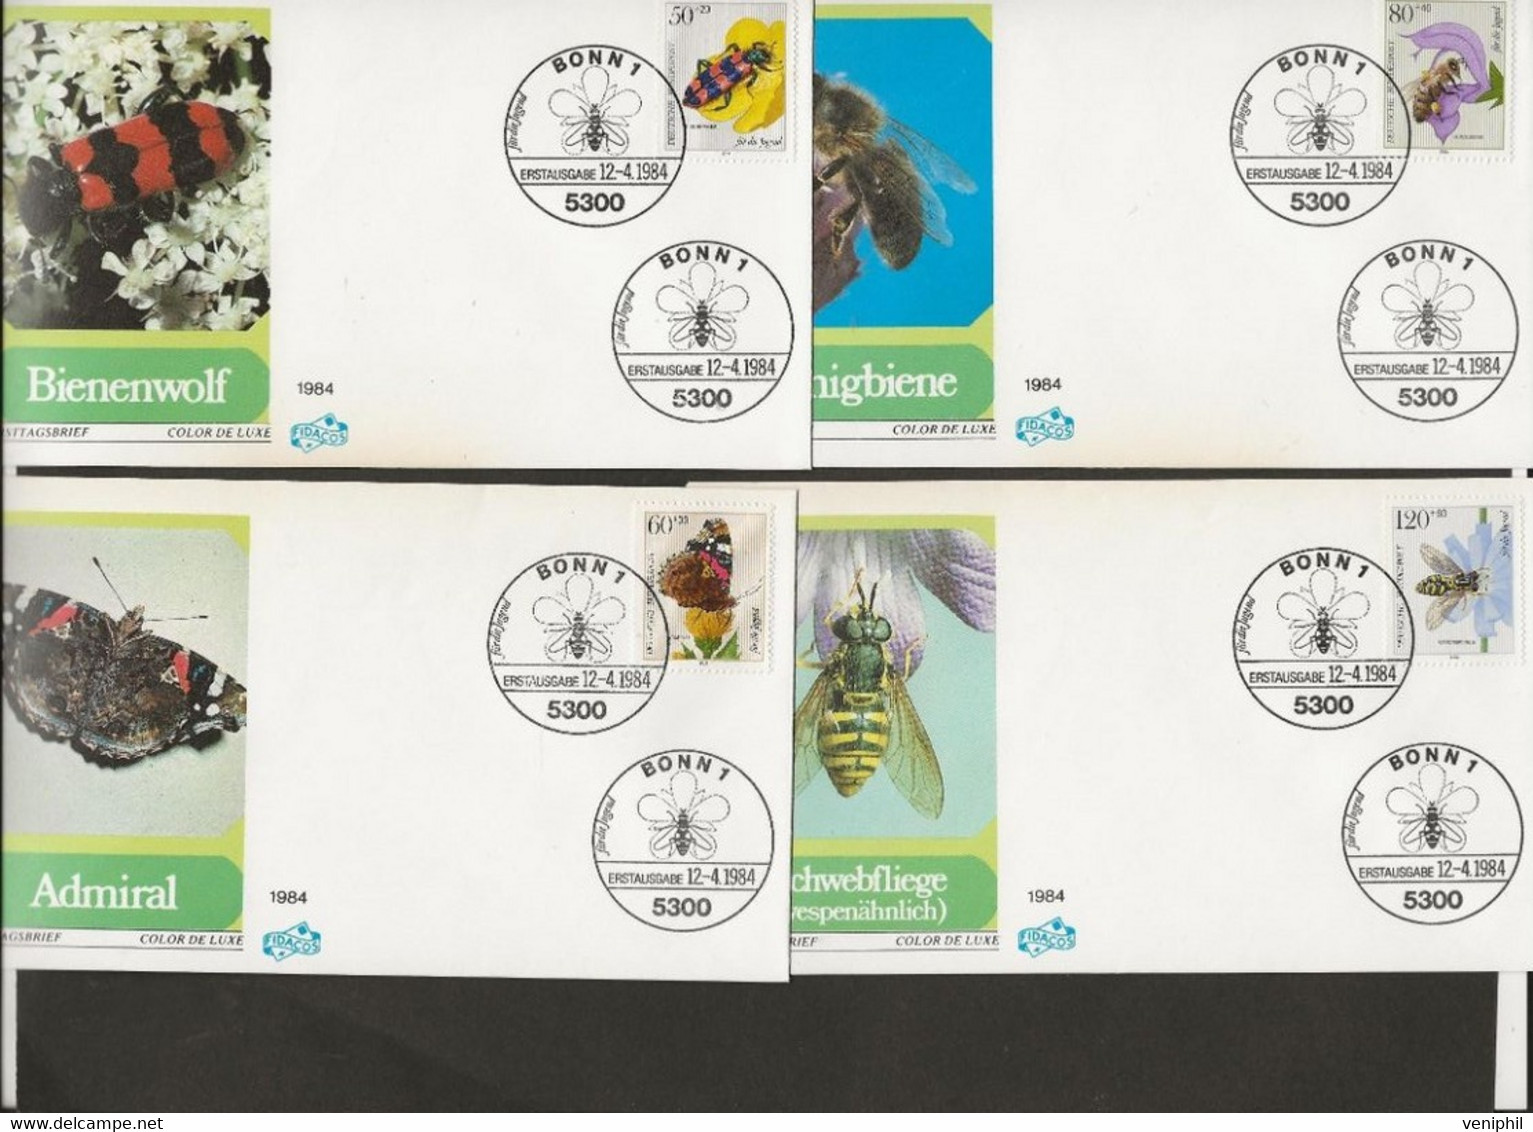 ALLEMAGNE - SERIE INSECTES N° 1034 A 1037 SUR 4 LETTRES FDC - ANNEE 1984 - Honeybees